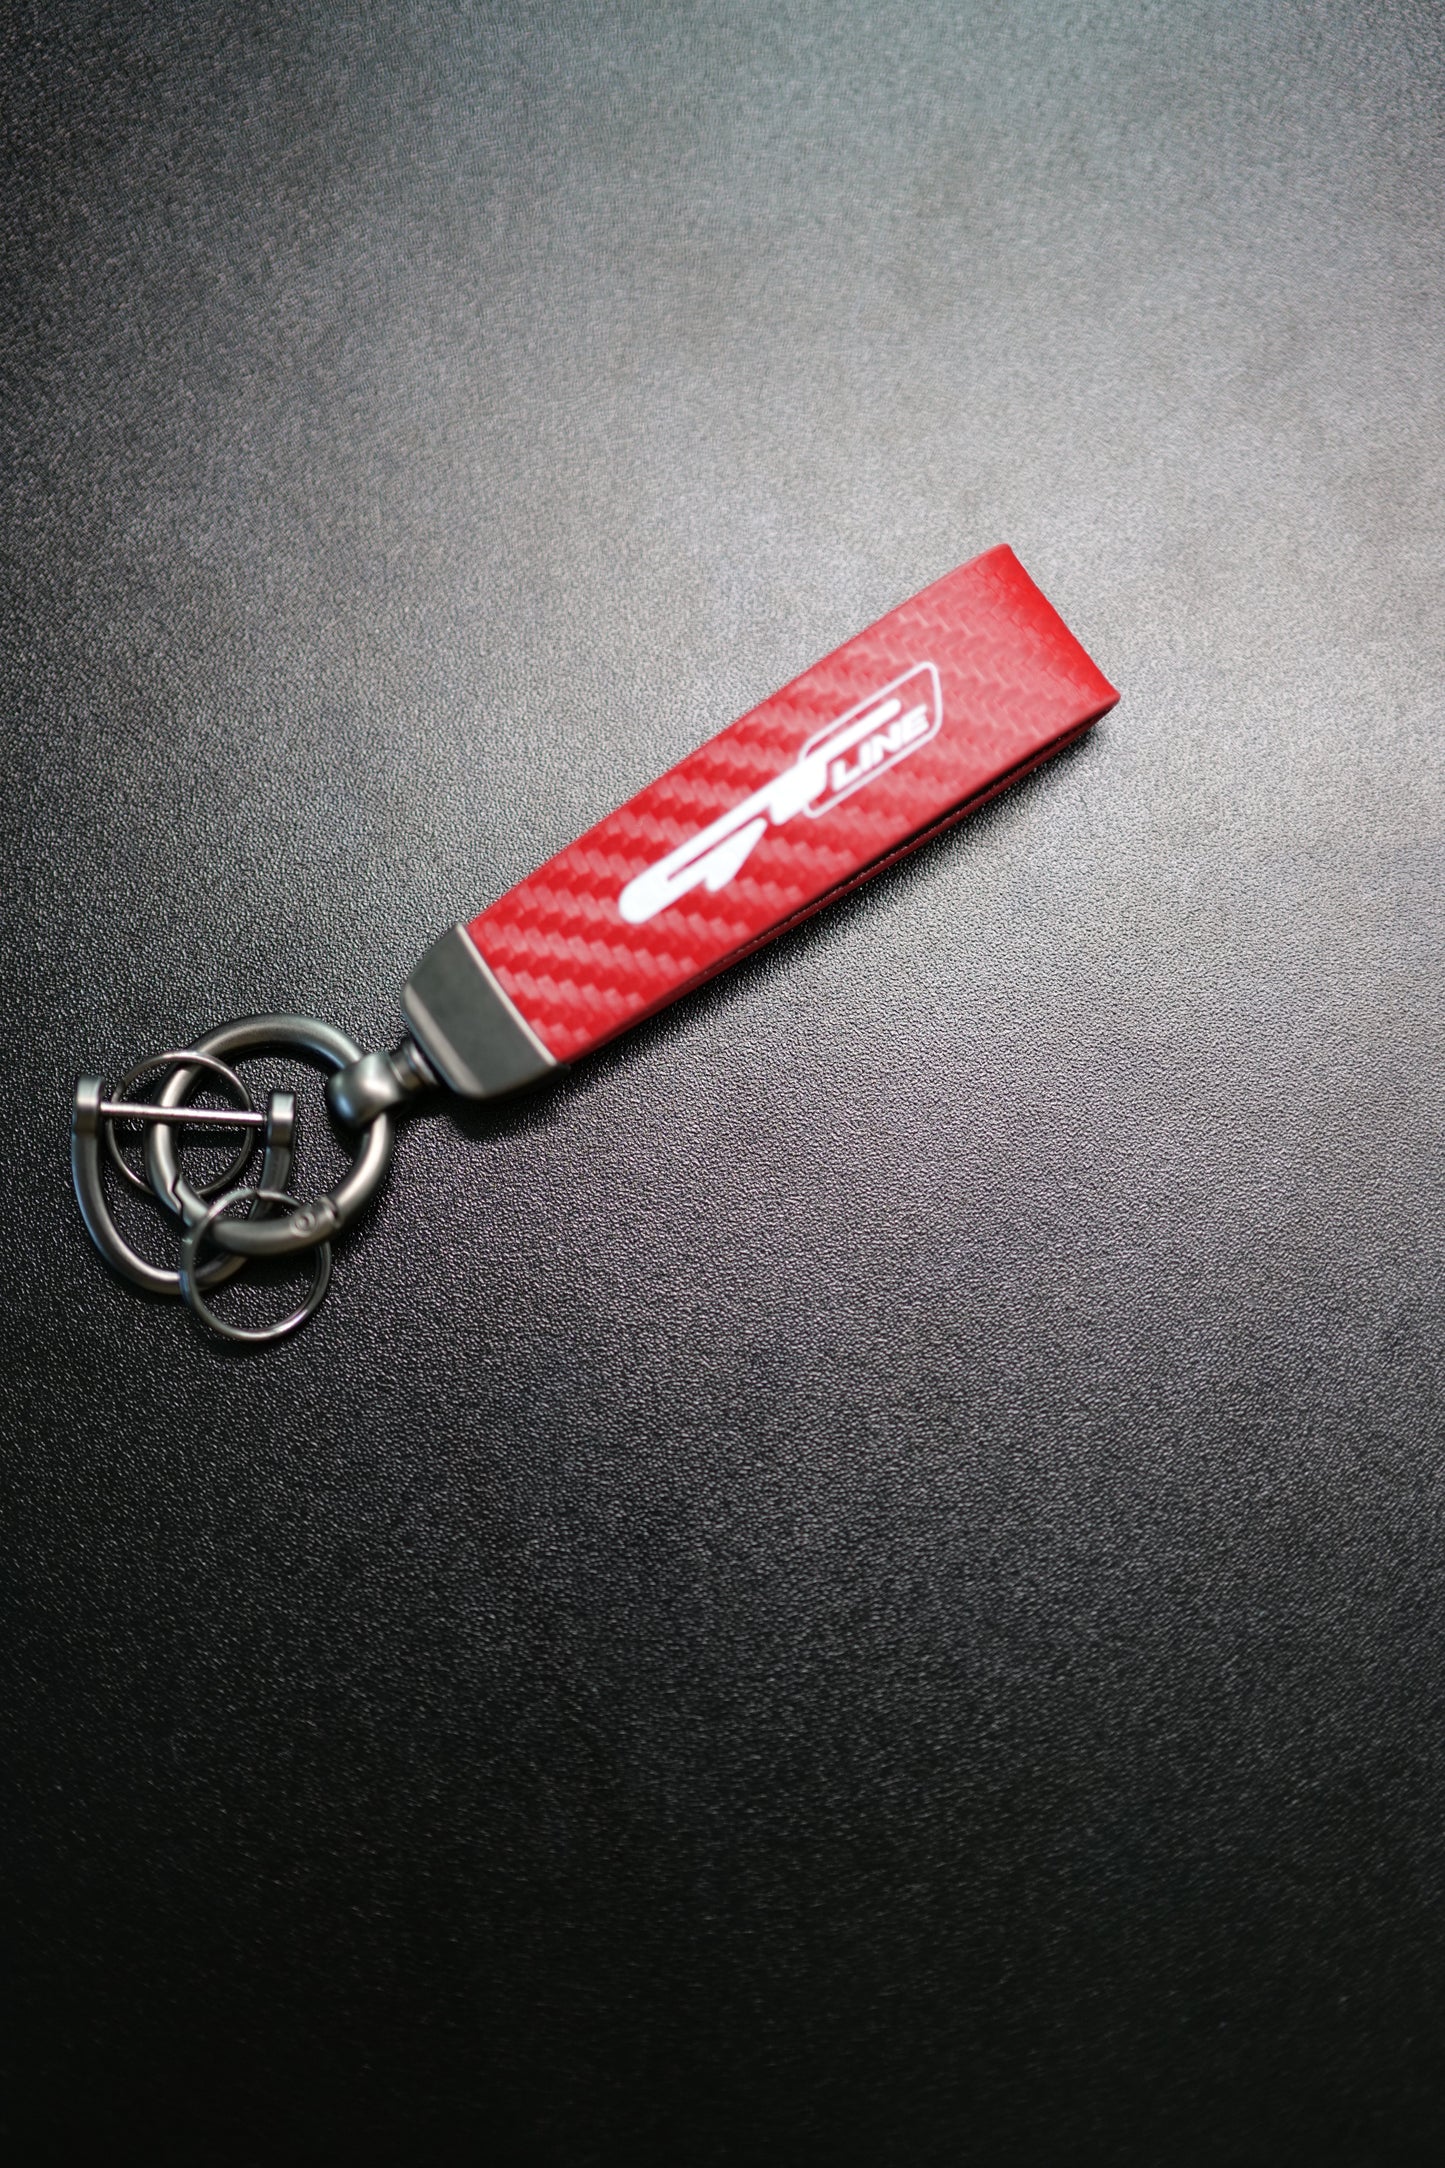 GT-line/GT Carbon Fiber Pattern Keychain - Perfect Fit for Kia Enthusiasts